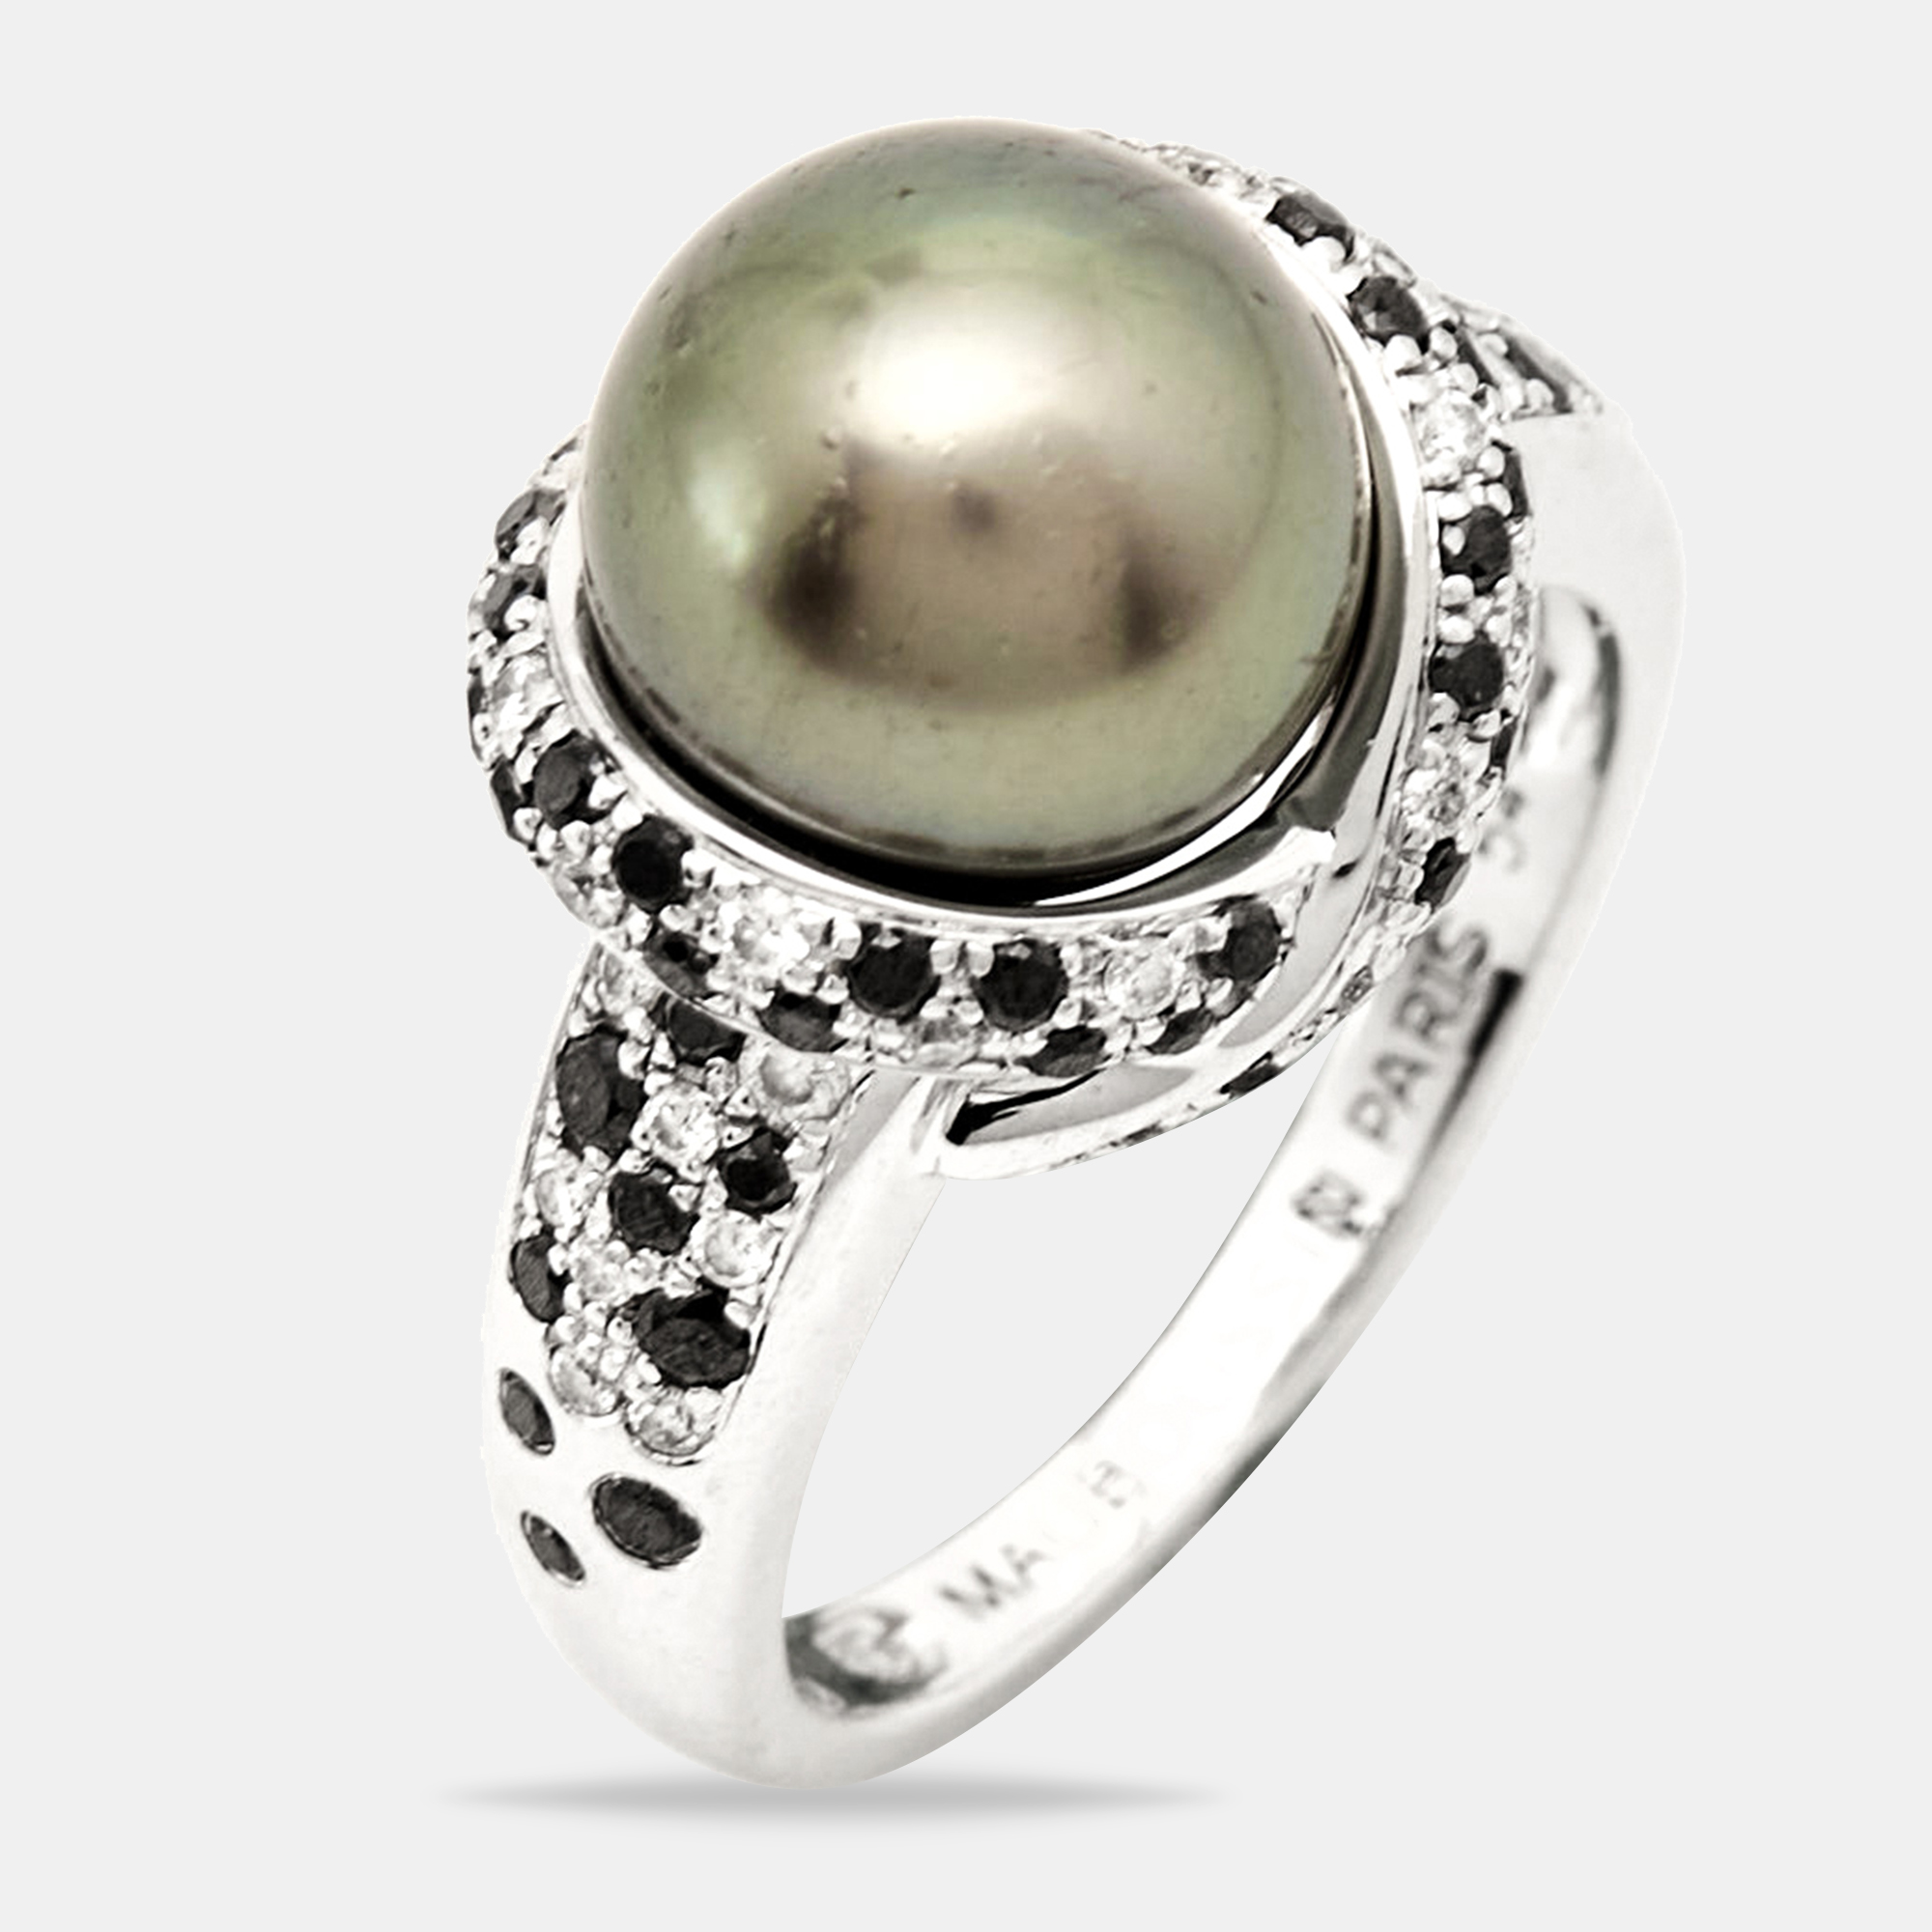 Mauboussin Perle Caviar Mon Amour Cultured Pearl Diamond 18K White Gold Cocktail Ring Size 54